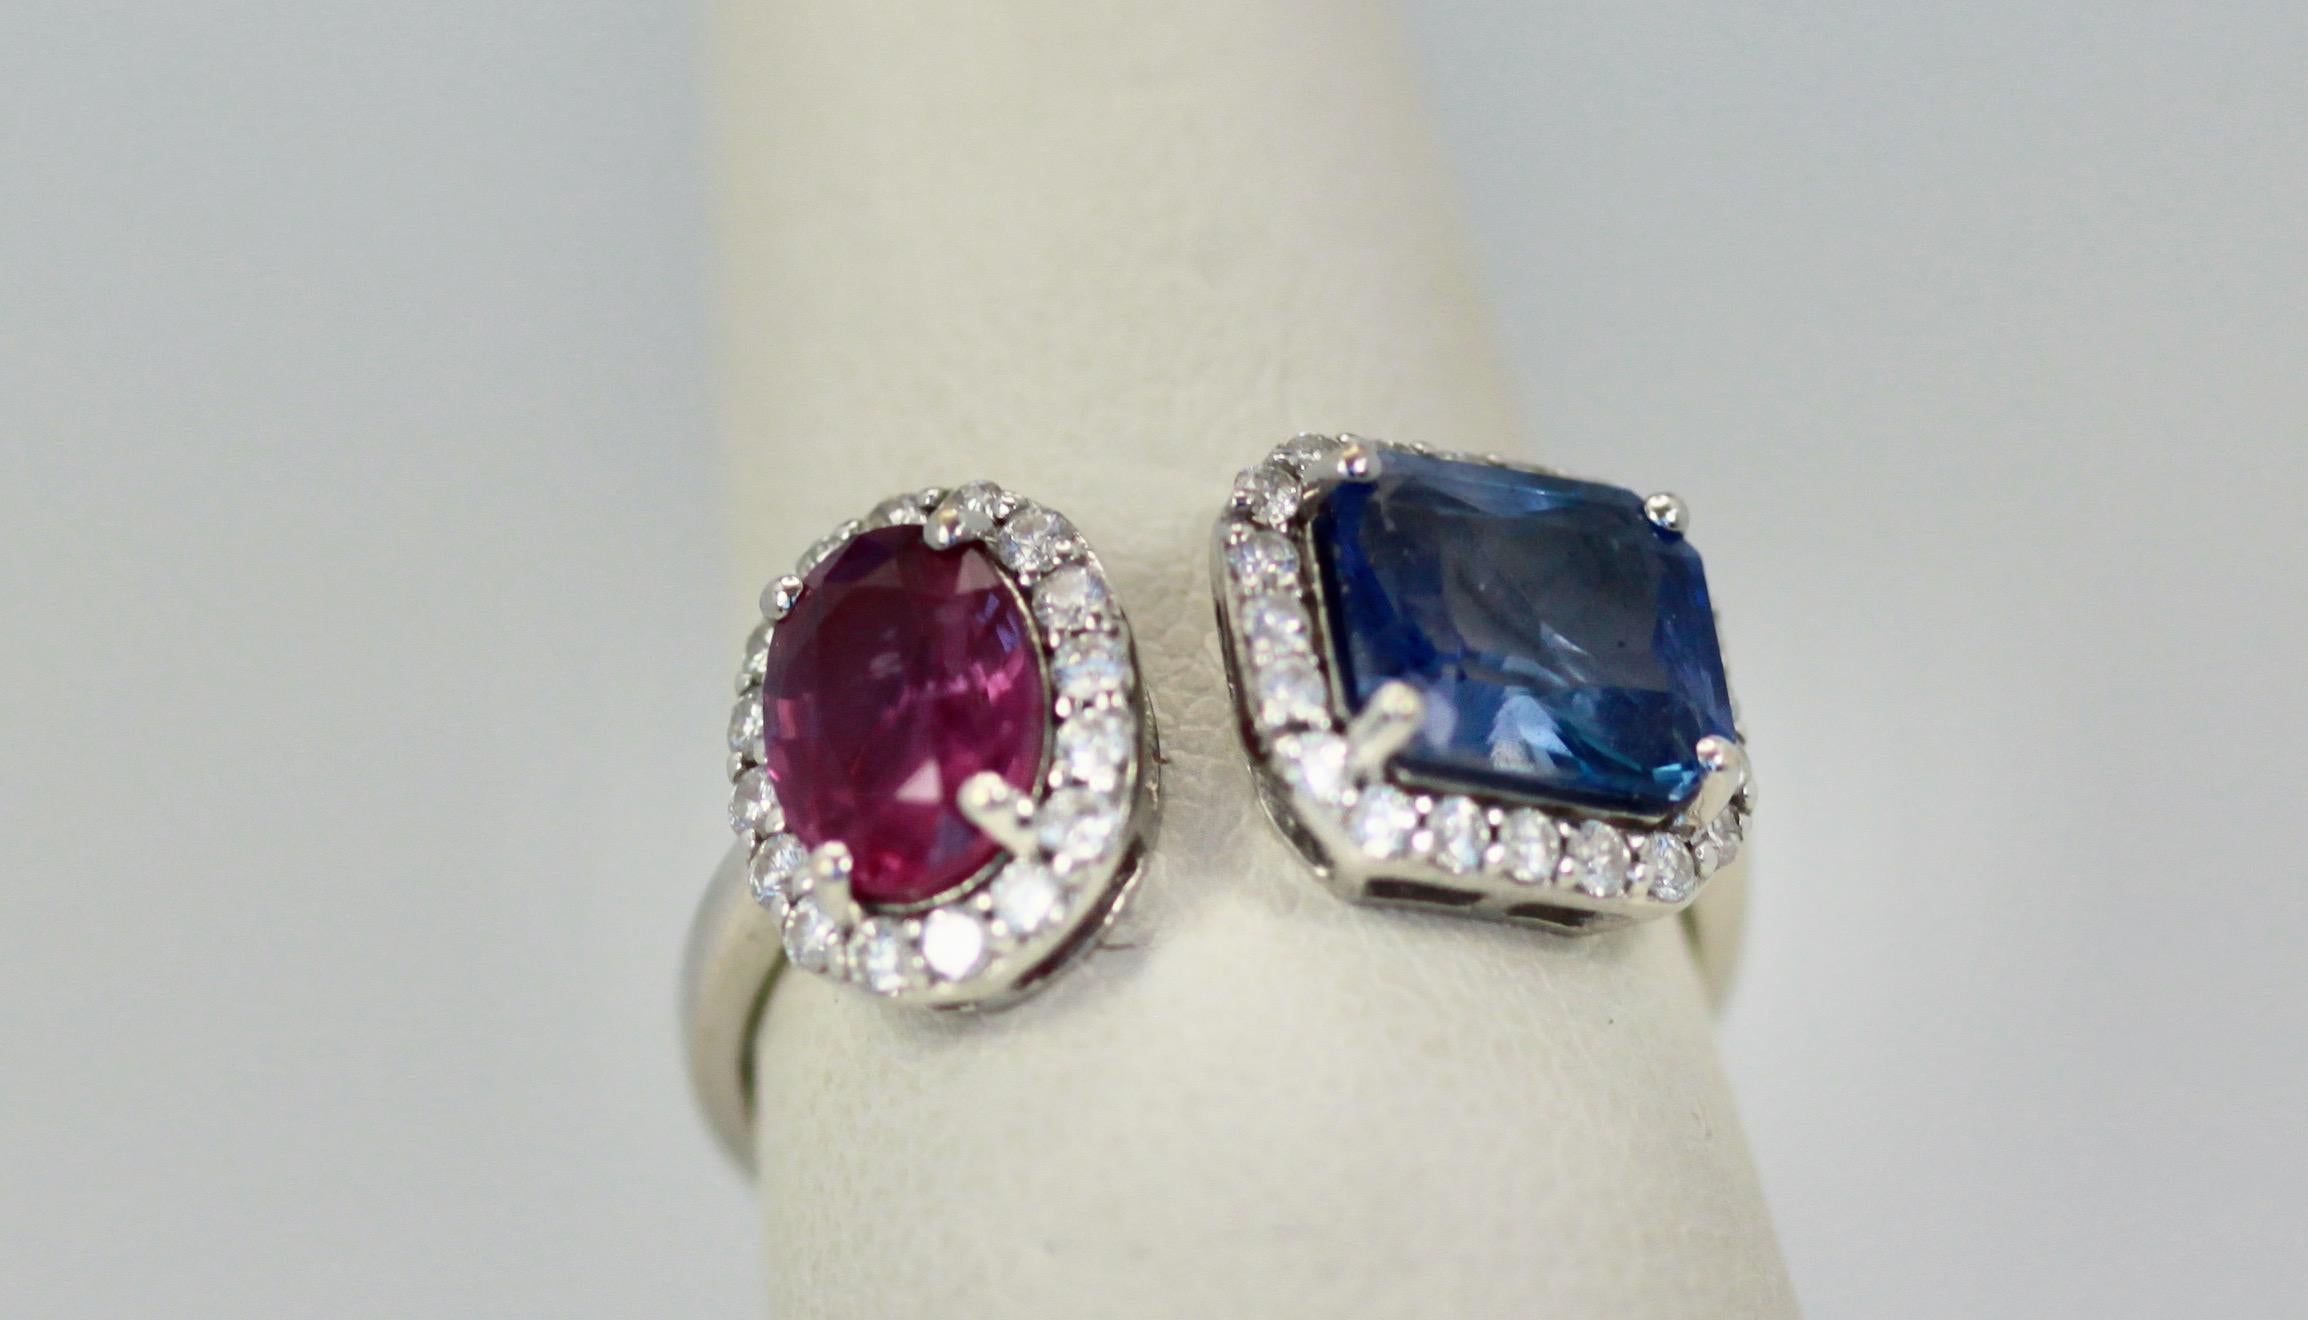 I just love this ring as I love the color of Blue and Pink Sapphires together. I considered making earrings to match one blue one pink Sapphires with a Diamond surround but if this sells then there is no need. This Blue and Pink Sapphire ring is